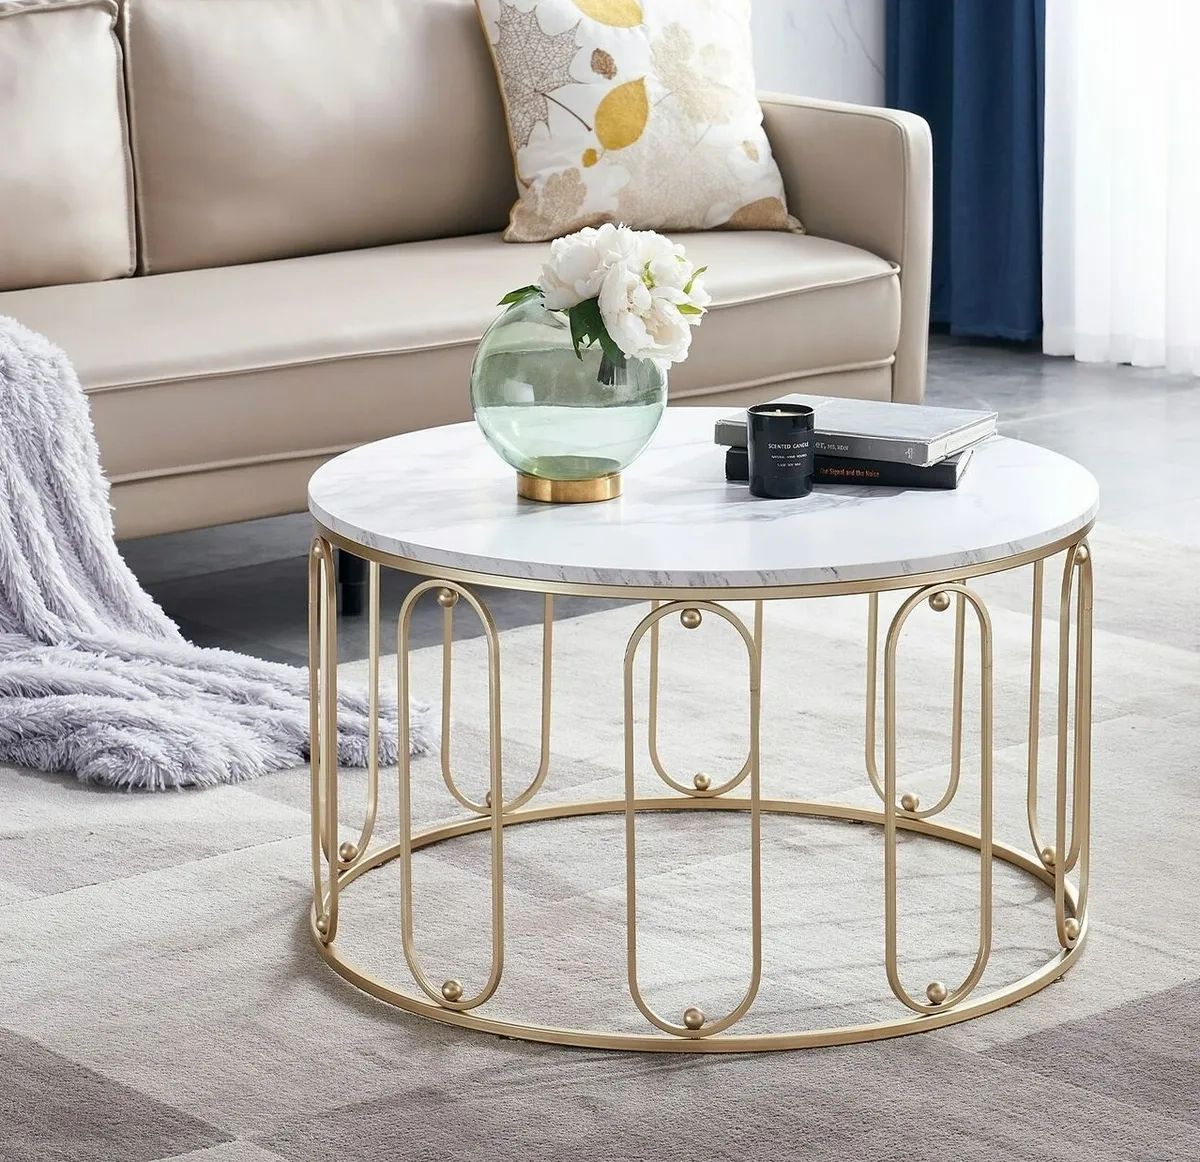 Ivinta Modern Nesting Coffee Table, Home Round Cocktail Table With Metal  Frame | Ebay Regarding Nesting Coffee Tables (View 12 of 15)